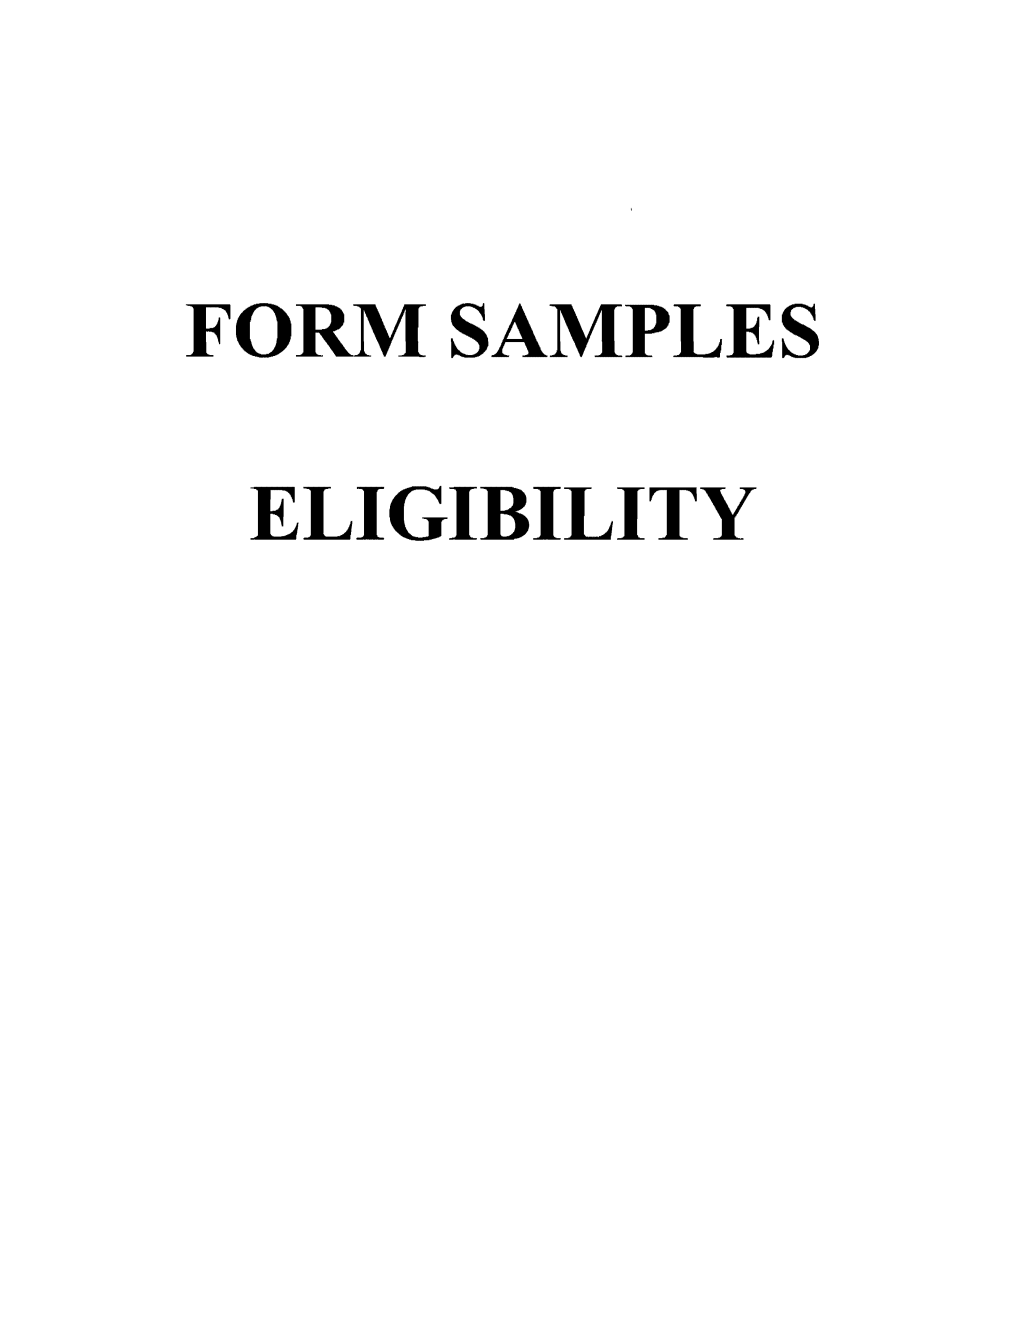 Form Samples Eligibility